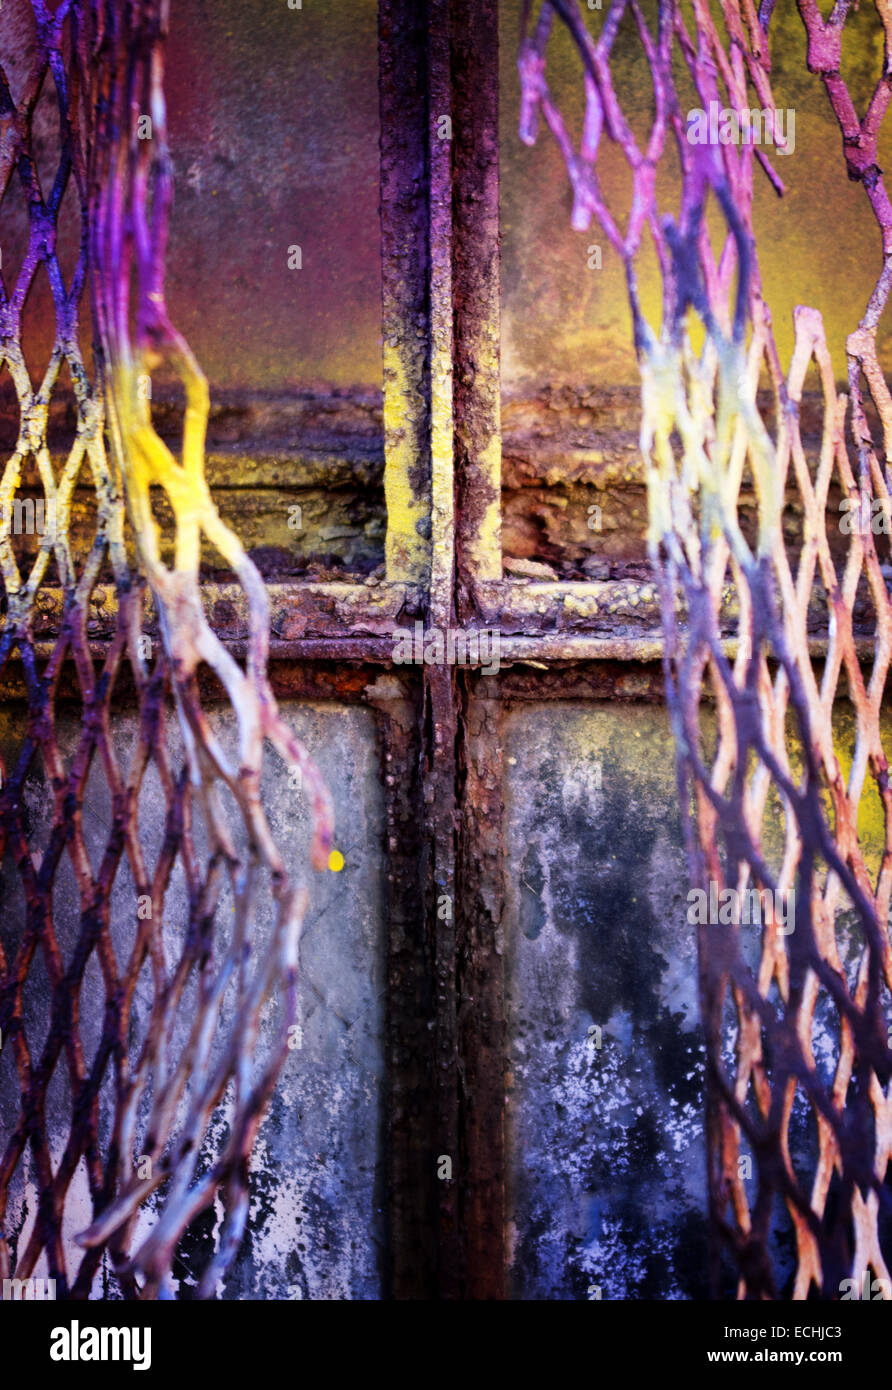 Abstract of a dilapidated window behind torn wire mesh, with traces of purple and yellow paint. Stock Photo